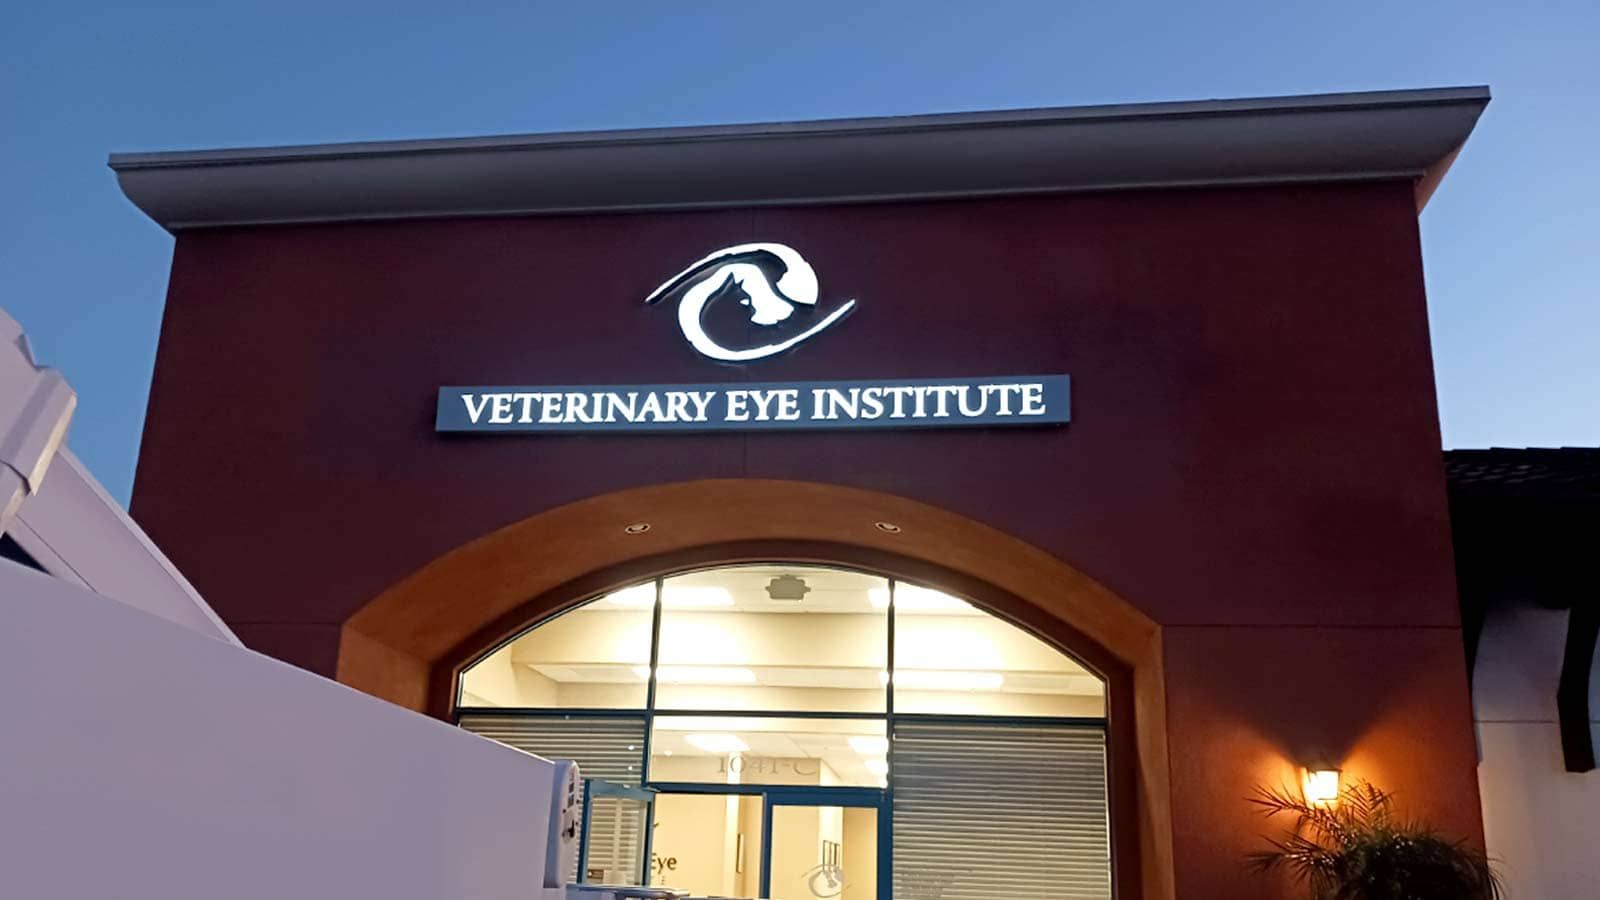 Veterinary Eye Institute light box signs for the exterior